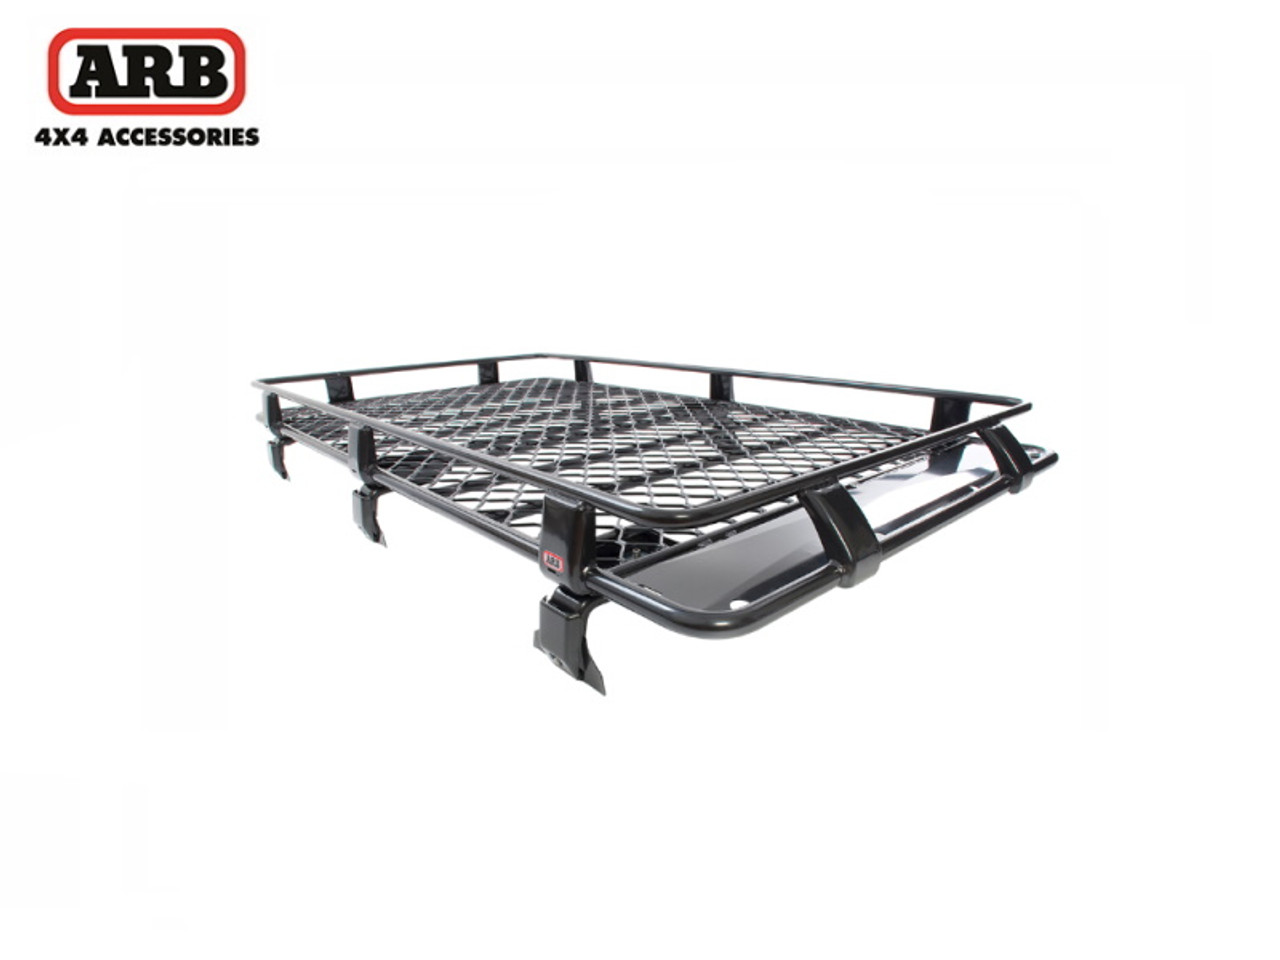 ARB Trade Deluxe Steel Roof Rack With Mesh Floor For Defender 110 - 3800100M